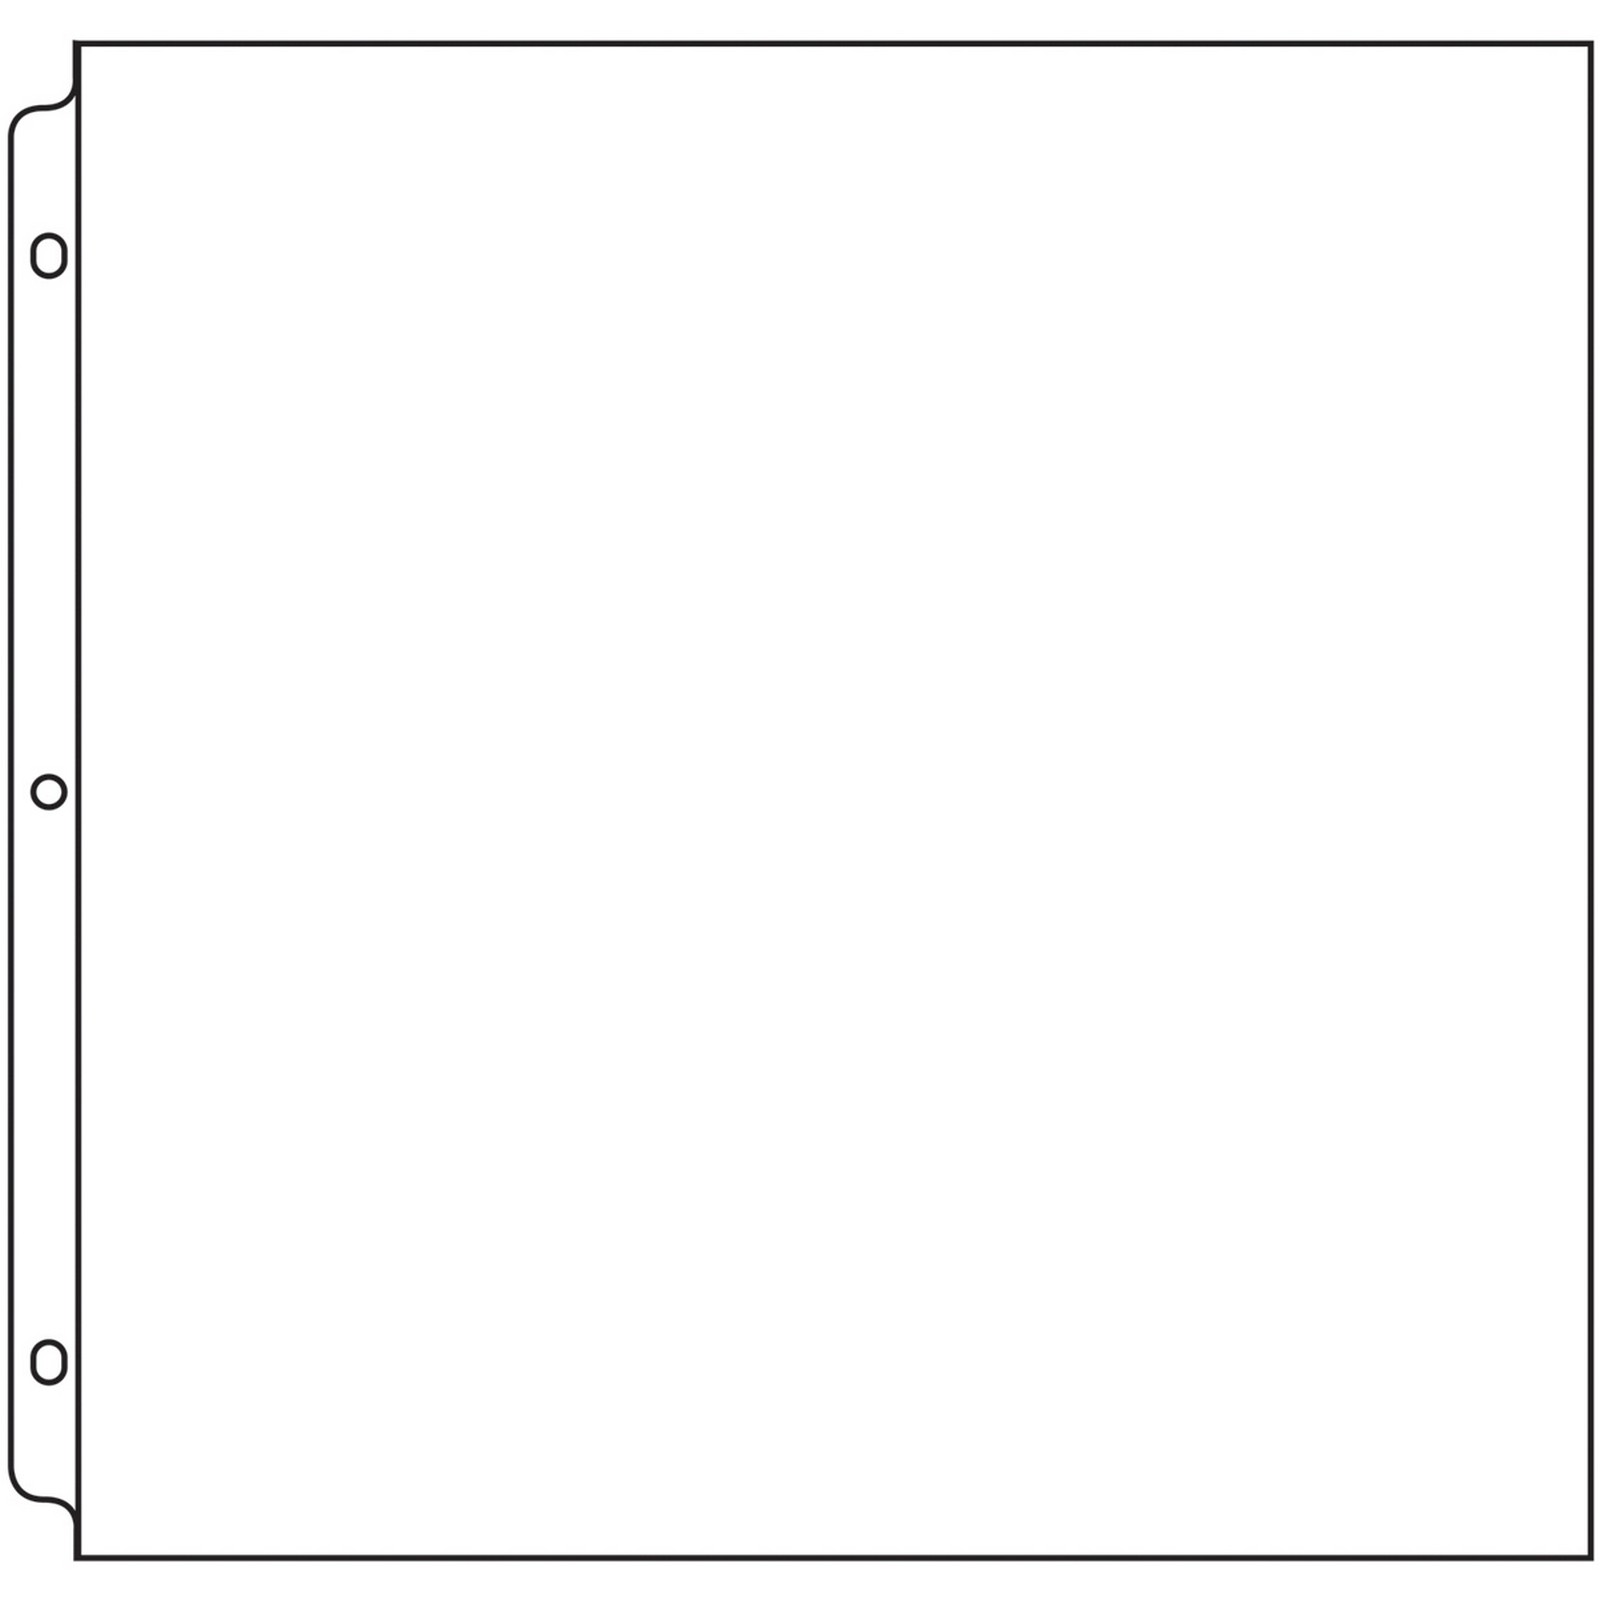 We R Ring Photo Sleeves 12"X12" 50/Pkg-Full Page